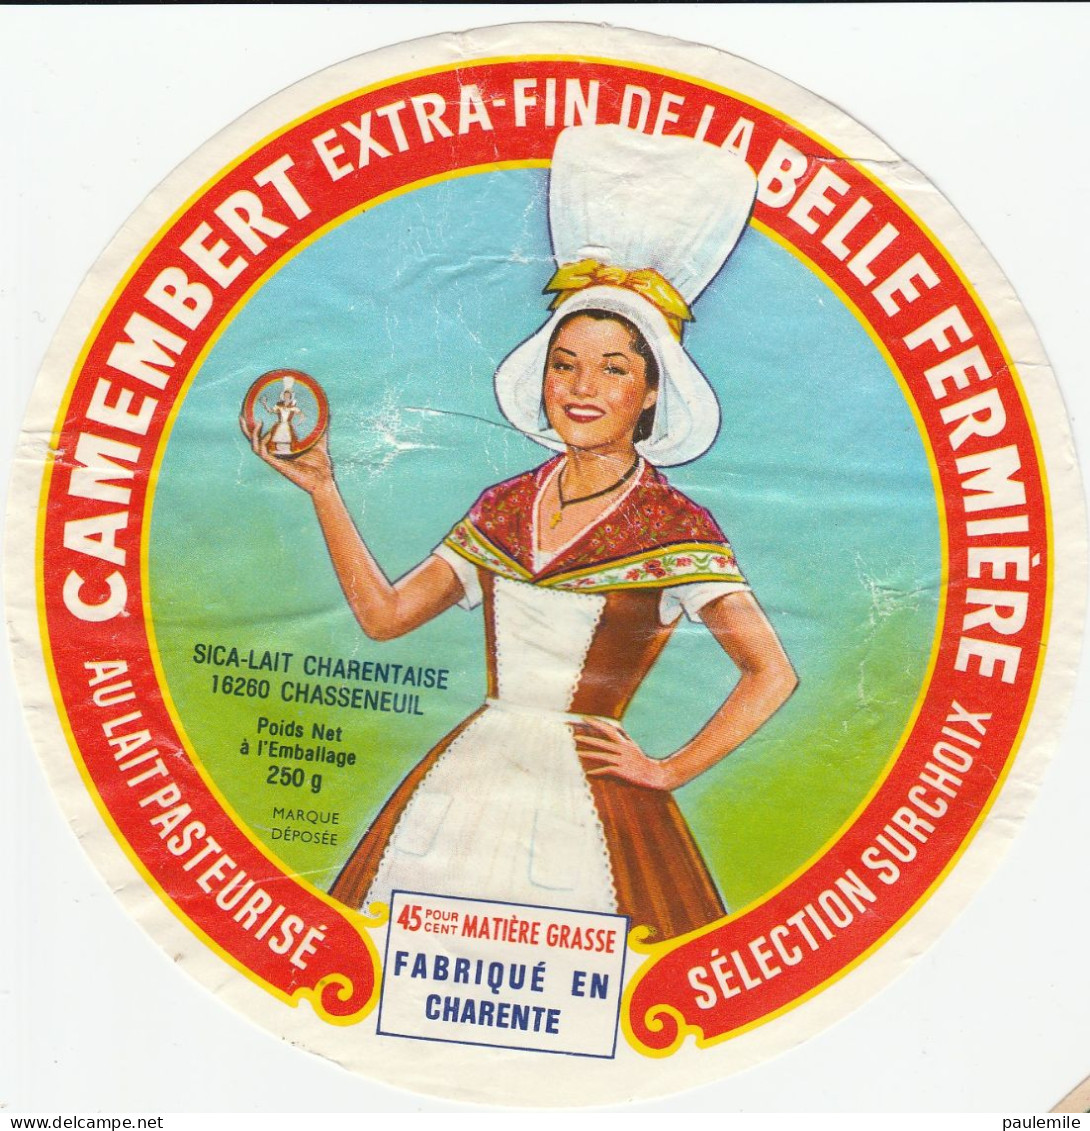 1 ETIQUETTE  CAMEMBERT DECOLLEE  CHARANTE CHASSENEUIL   BELLE FERMIERE - Cheese